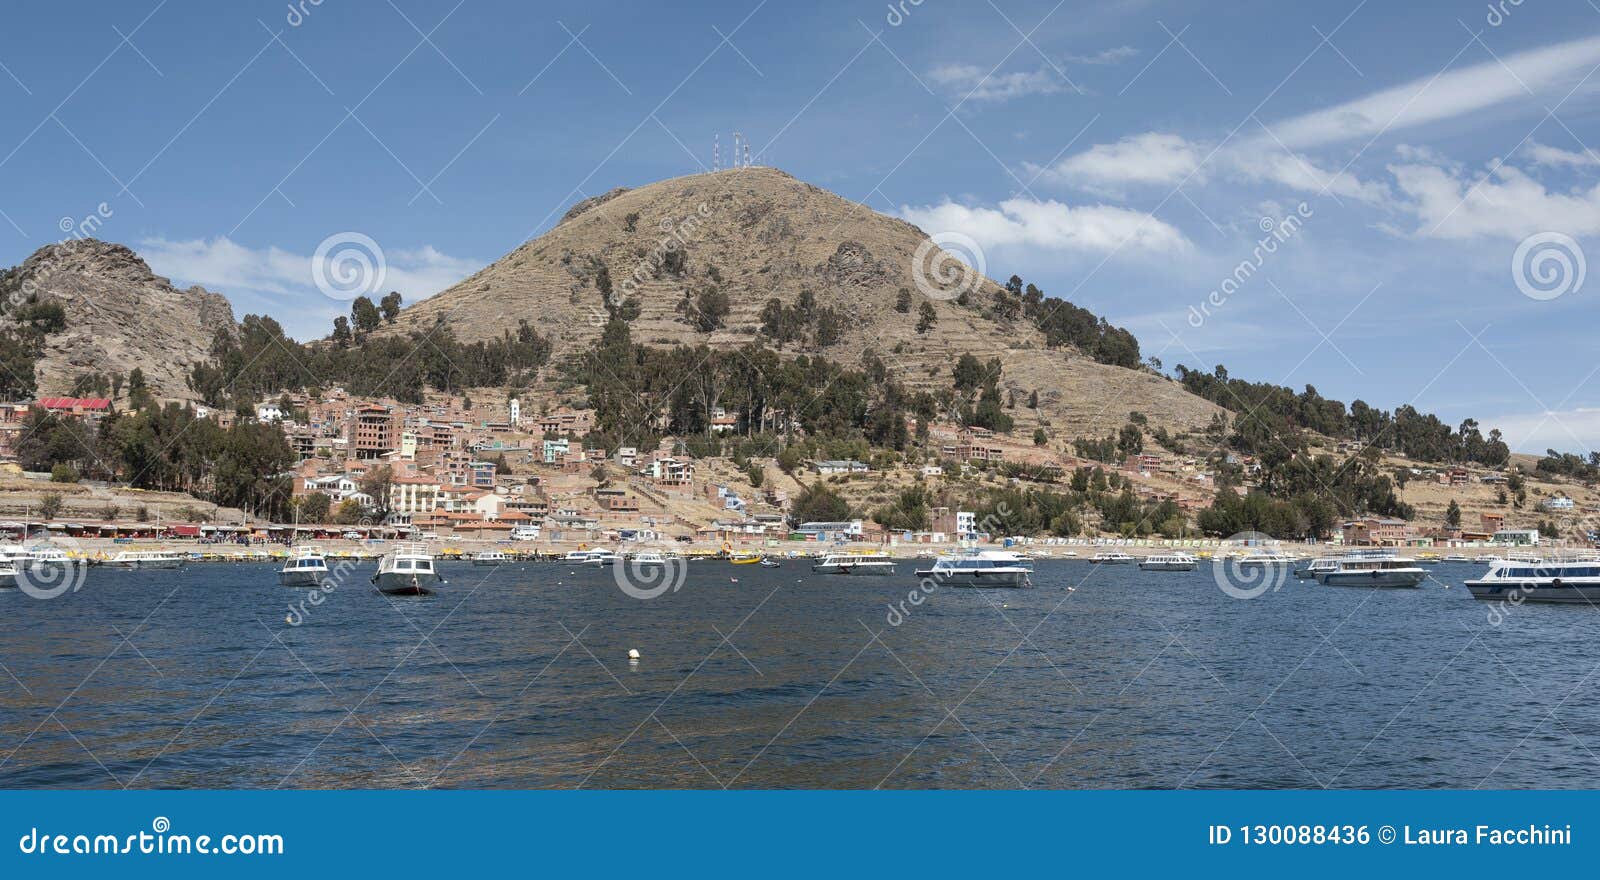 isla del sol, on the titicaca lake, the largest highaltitude lake in the world 3808 mt